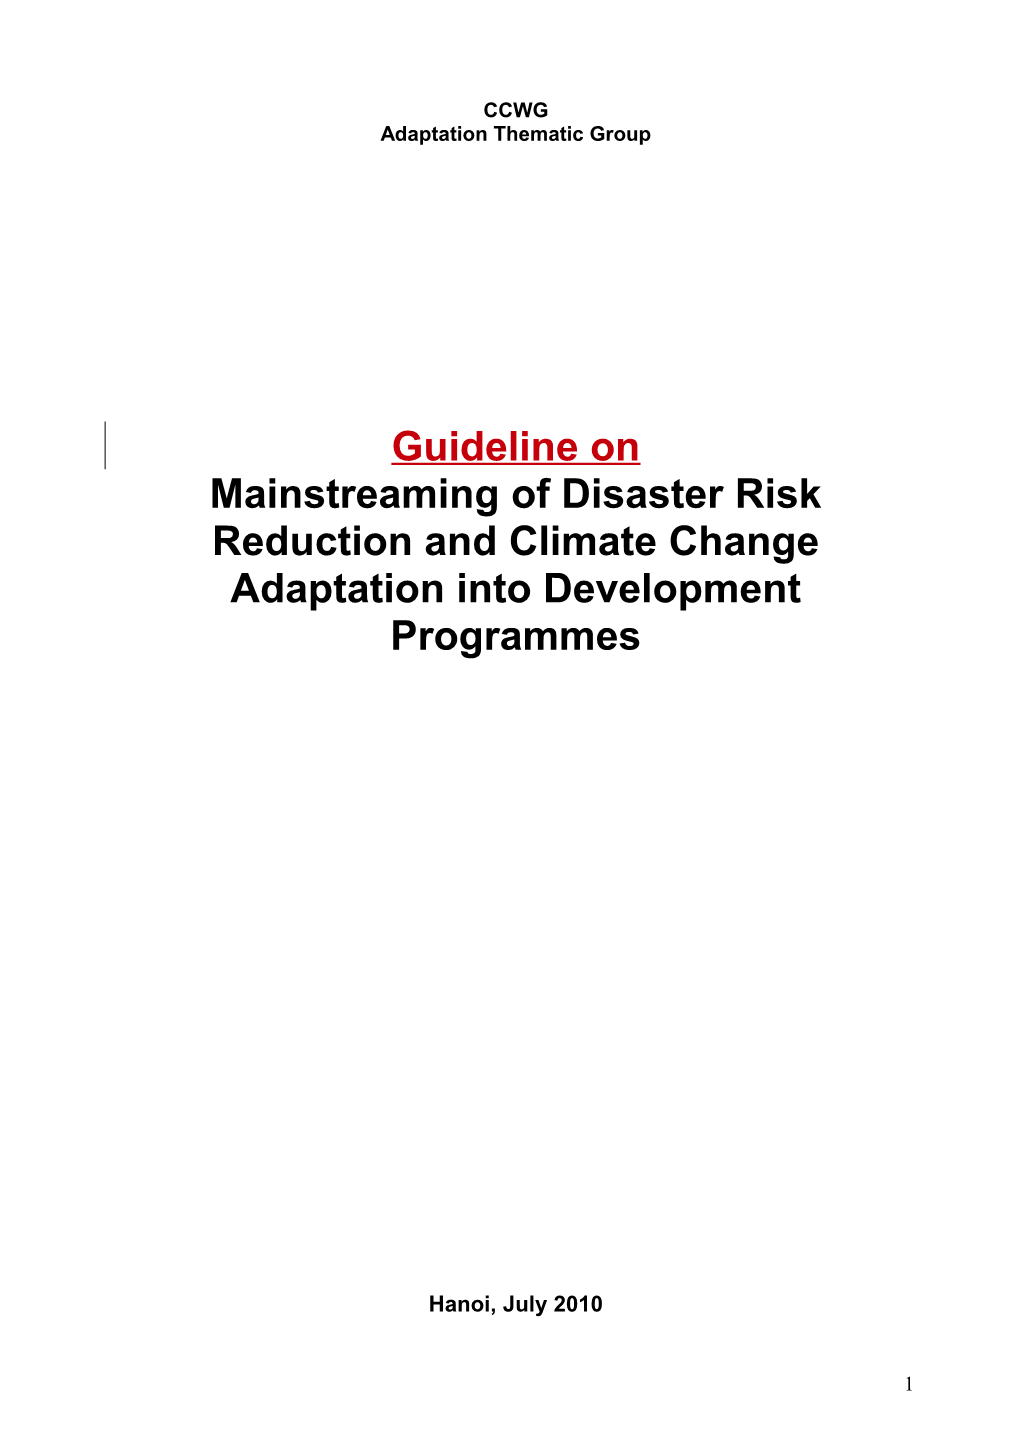 Mainstreaming of Disaster Risk Reduction and Climate Change Adaptation Into Development